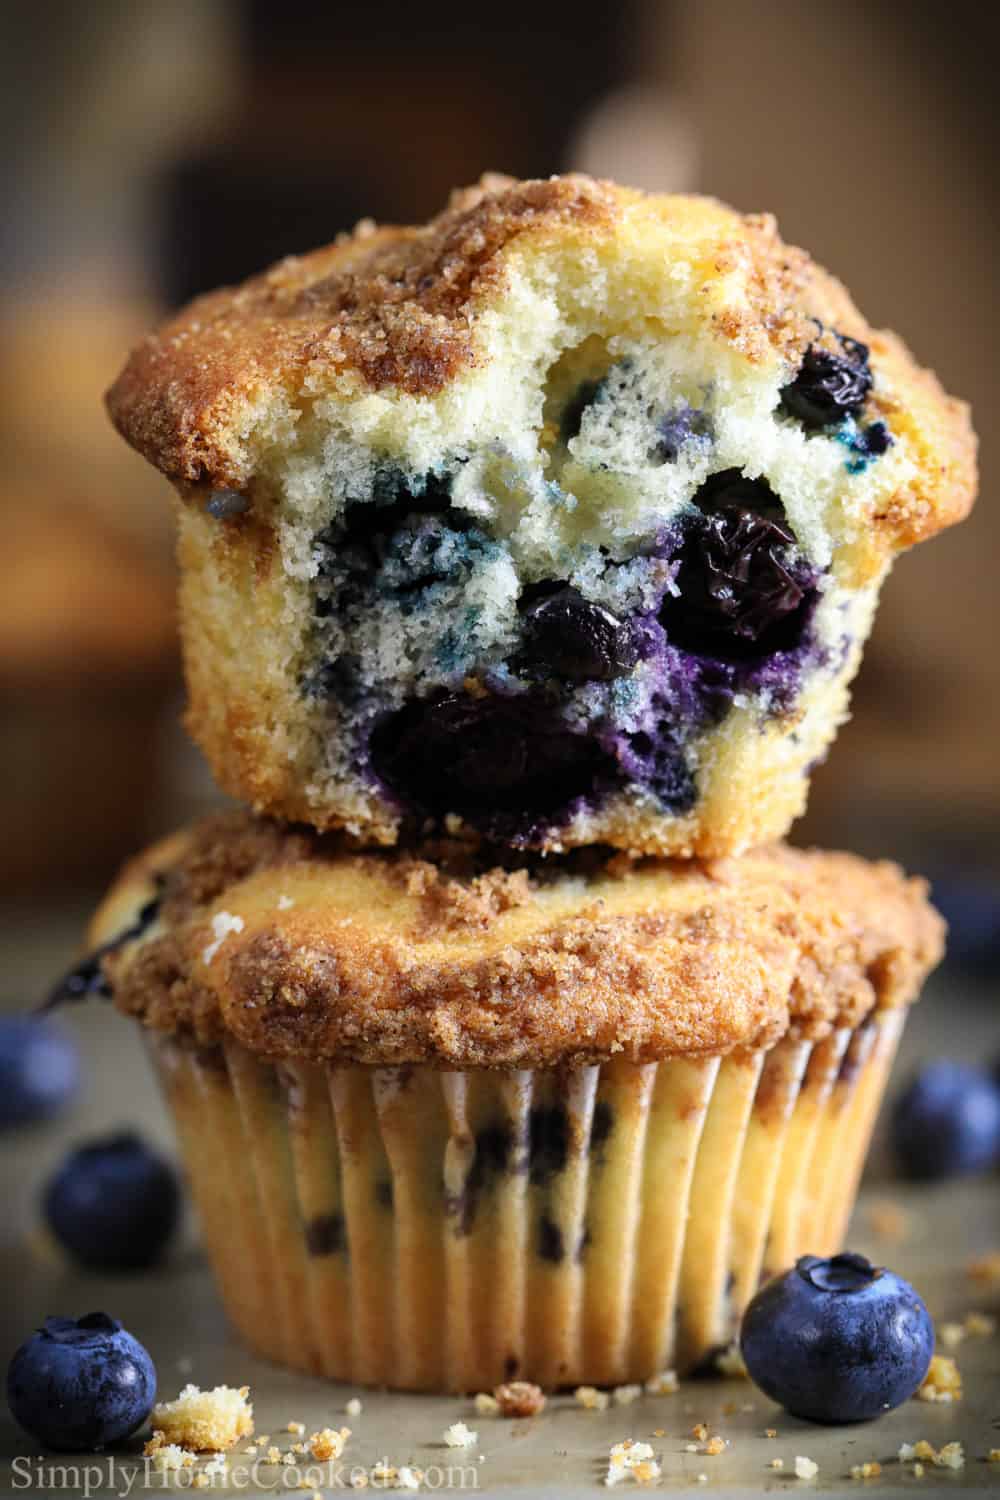 Best Blueberry Muffins Recipe (VIDEO) - Simply Home Cooked